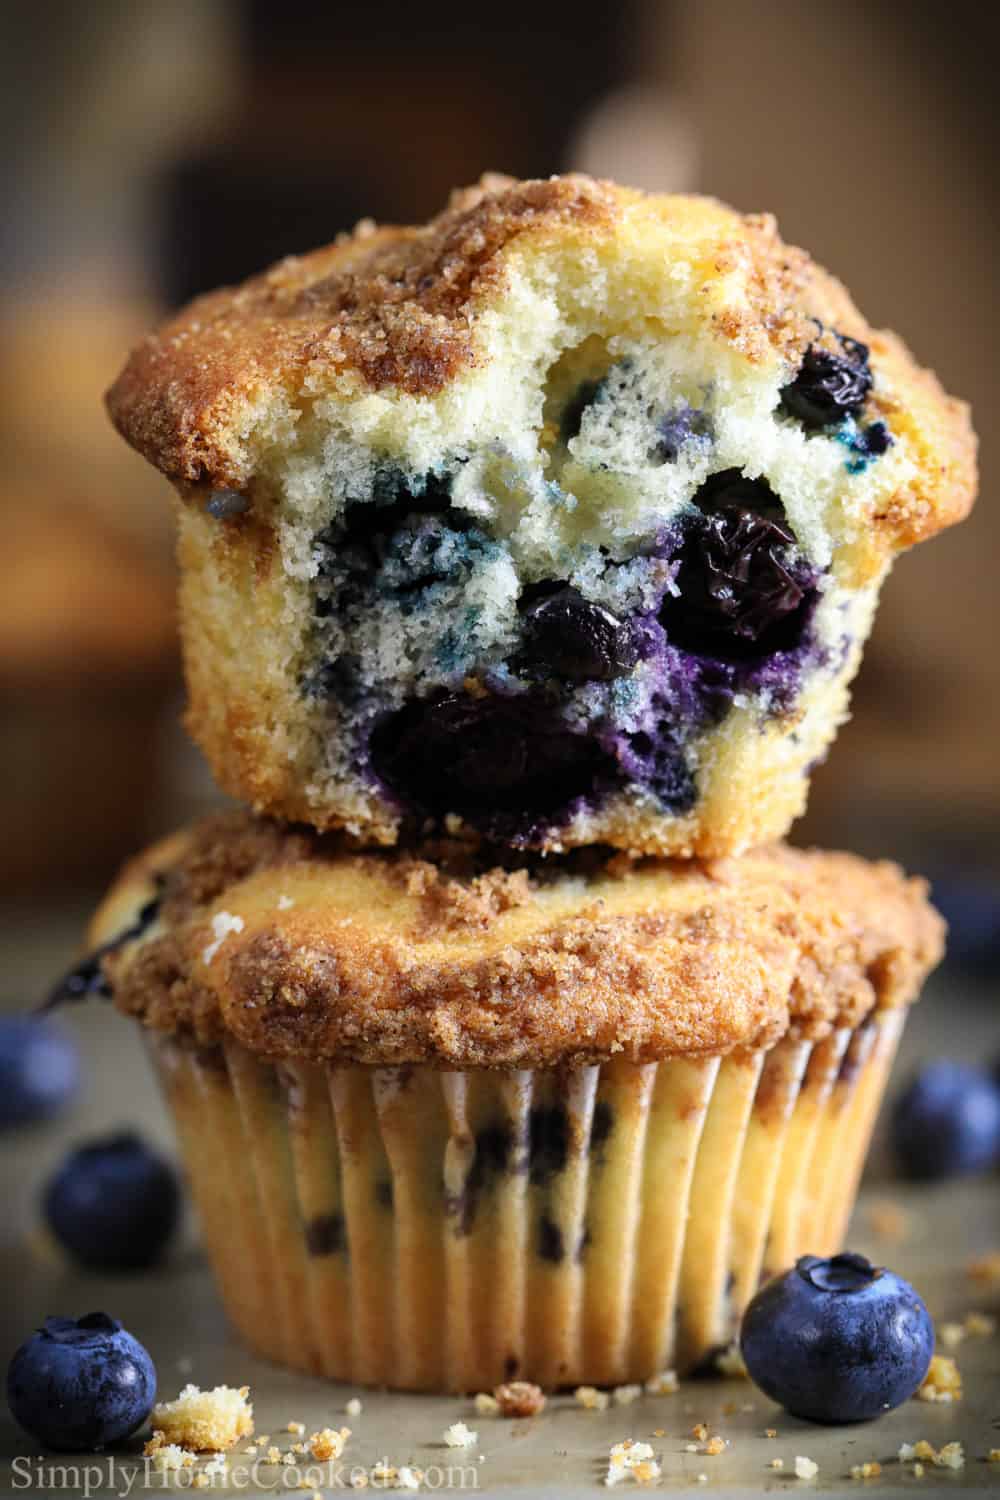 Best Blueberry Muffins Recipe (VIDEO) - Simply Home Cooked